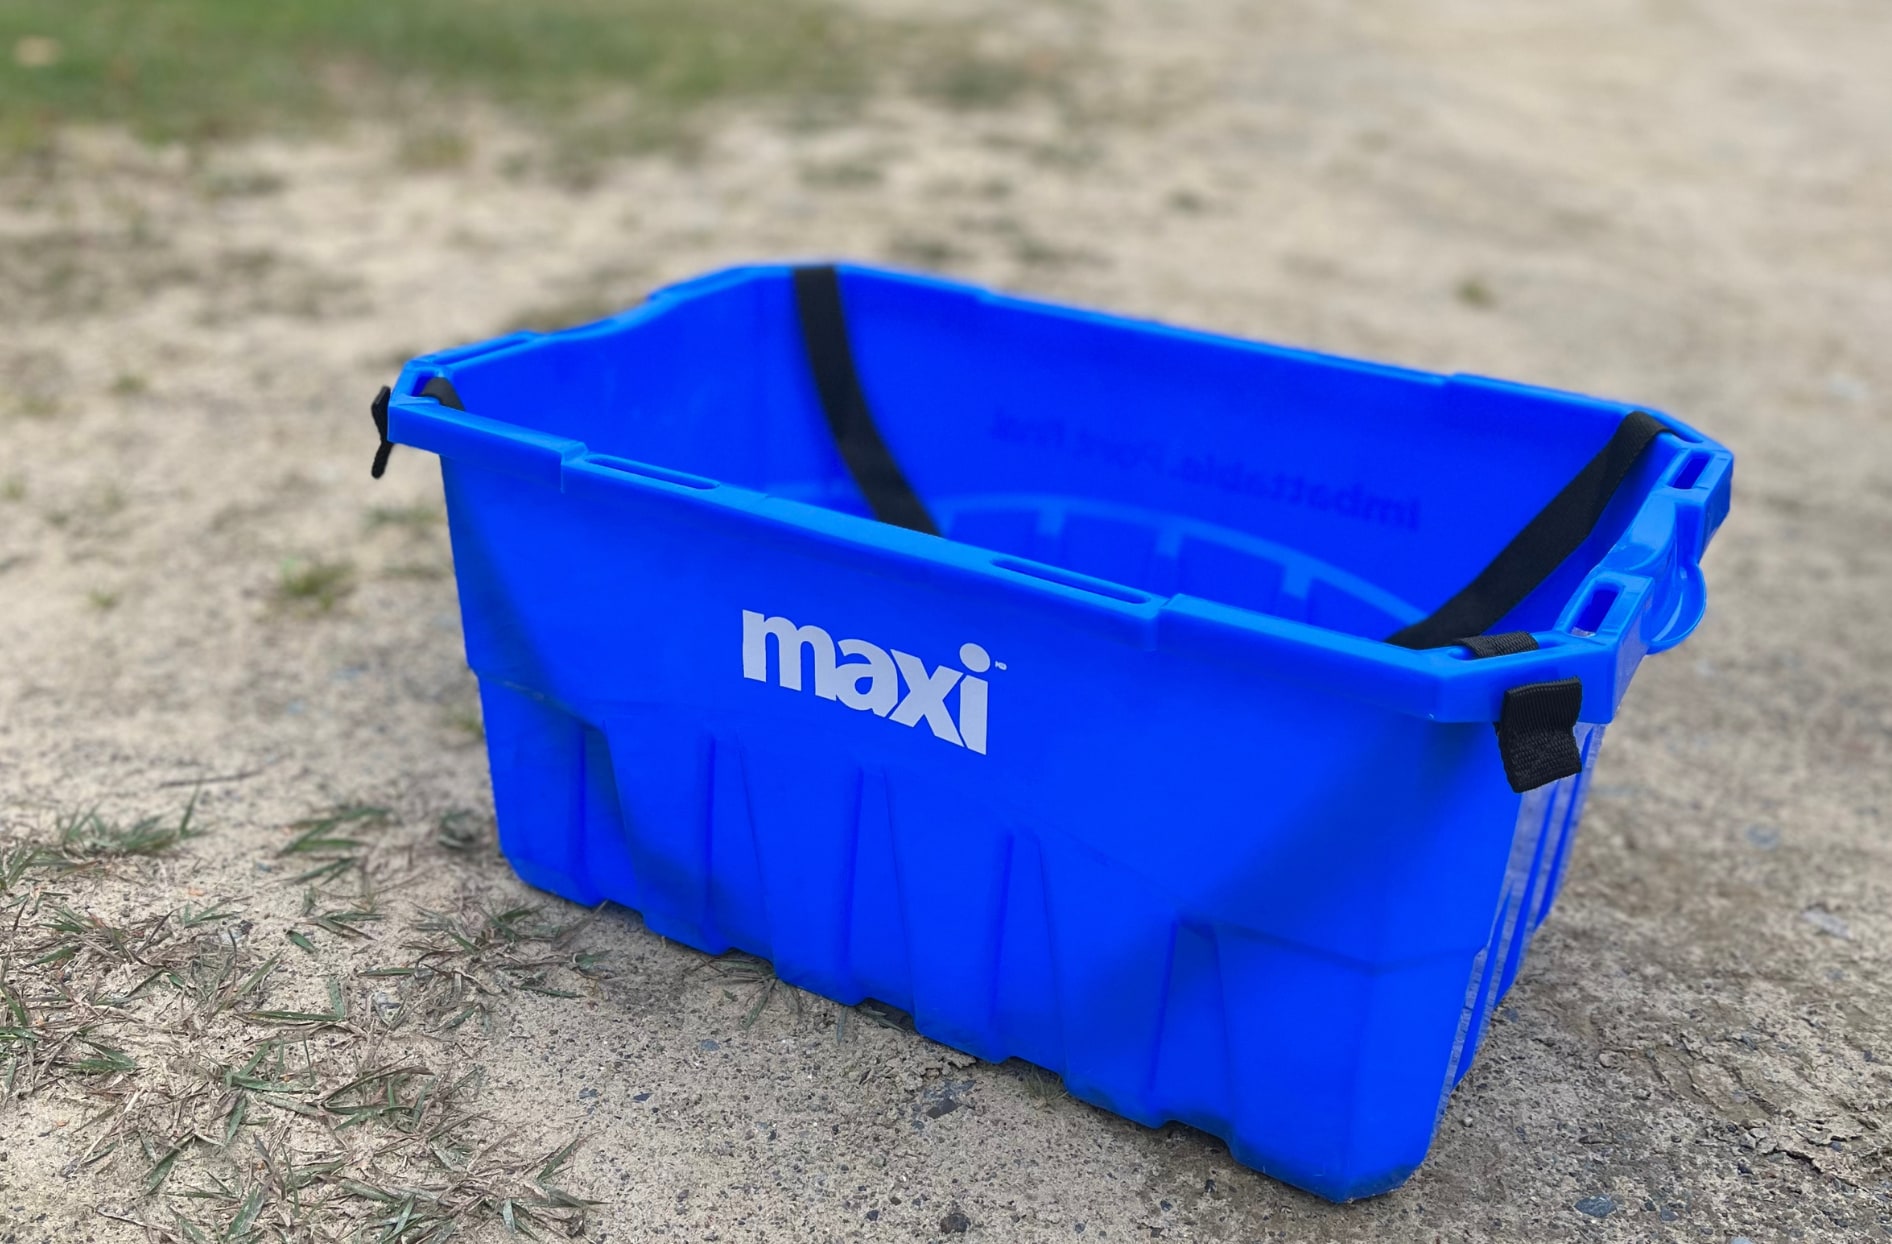 A photo of a blue reusable shopping basket with the maxi logo on the side sitting on sand outside.